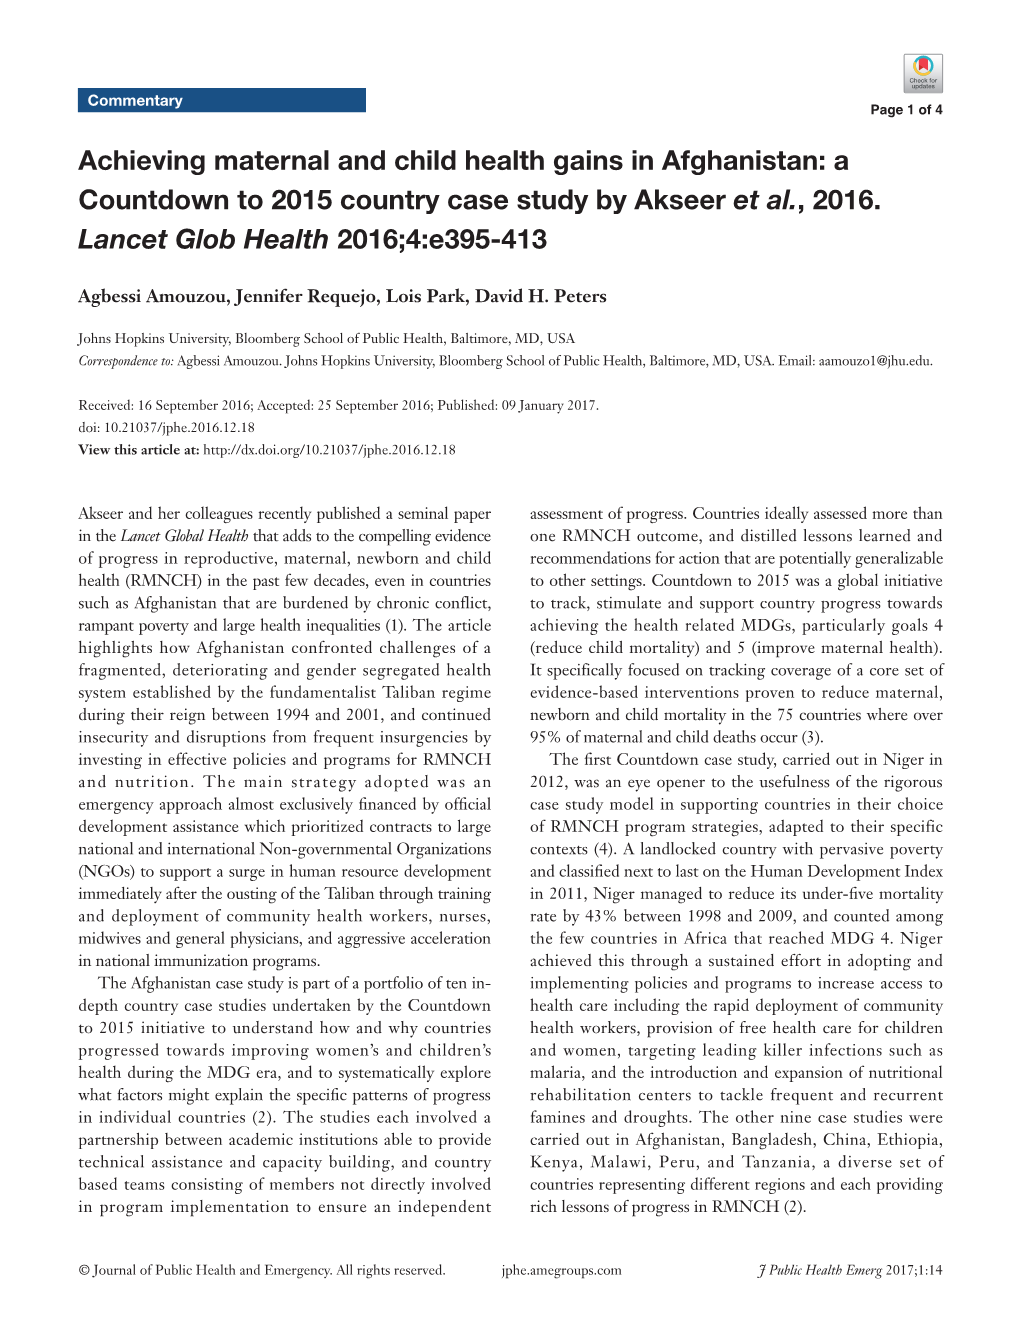 Achieving Maternal and Child Health Gains in Afghanistan: a Countdown to 2015 Country Case Study by Akseer Et Al., 2016